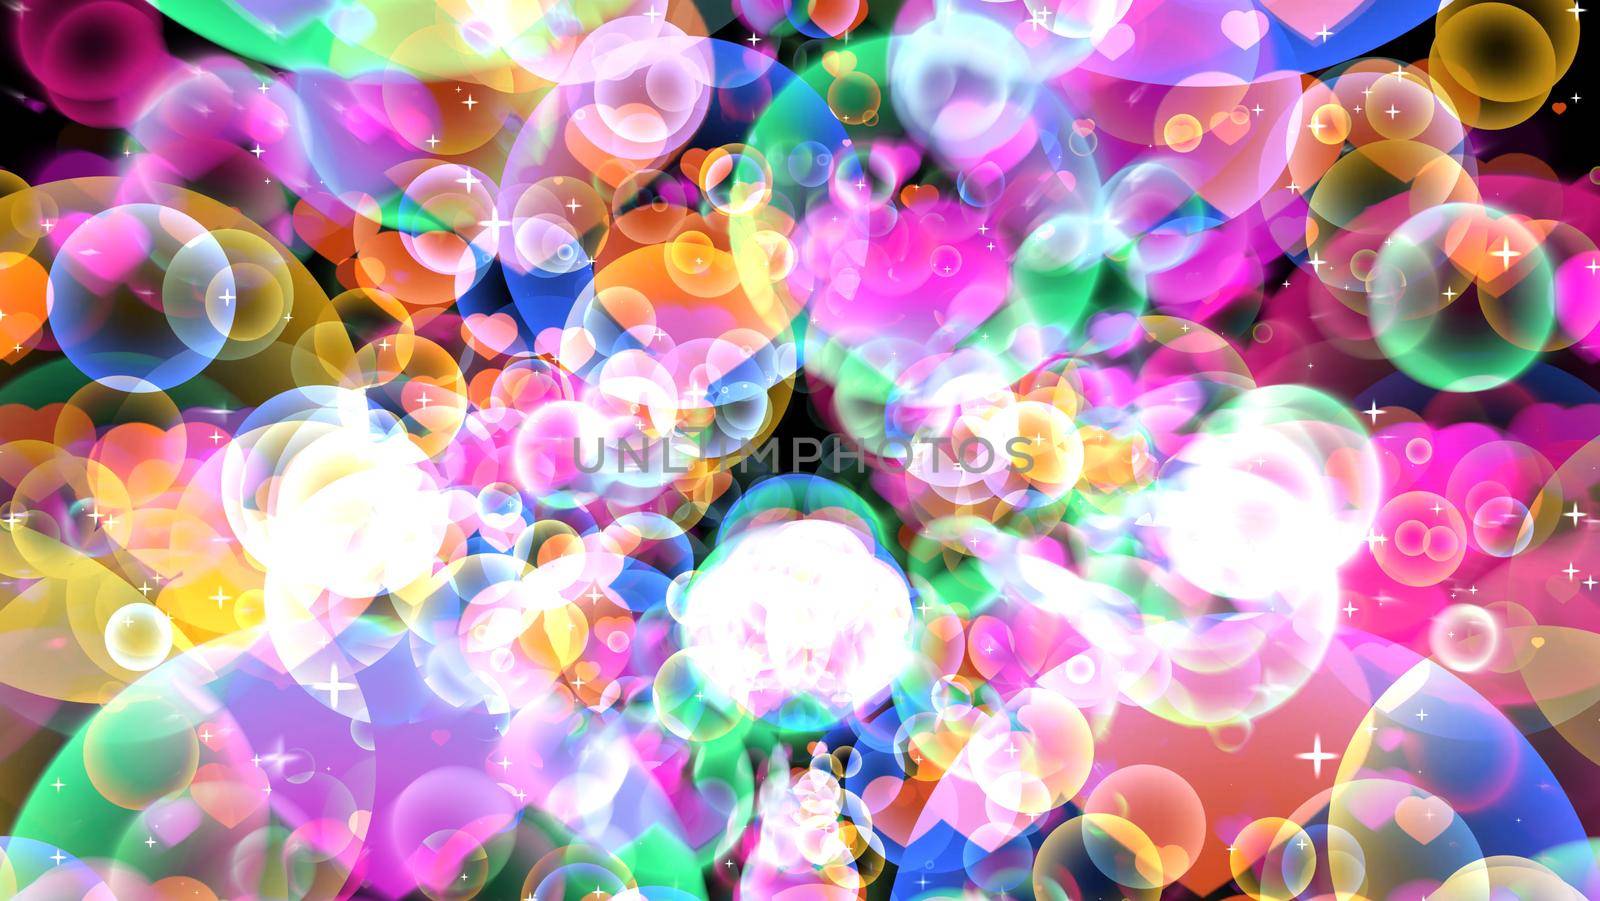 Rainbow reflection bubbles with hearts floating on black background with white star theme valentine day and love concept